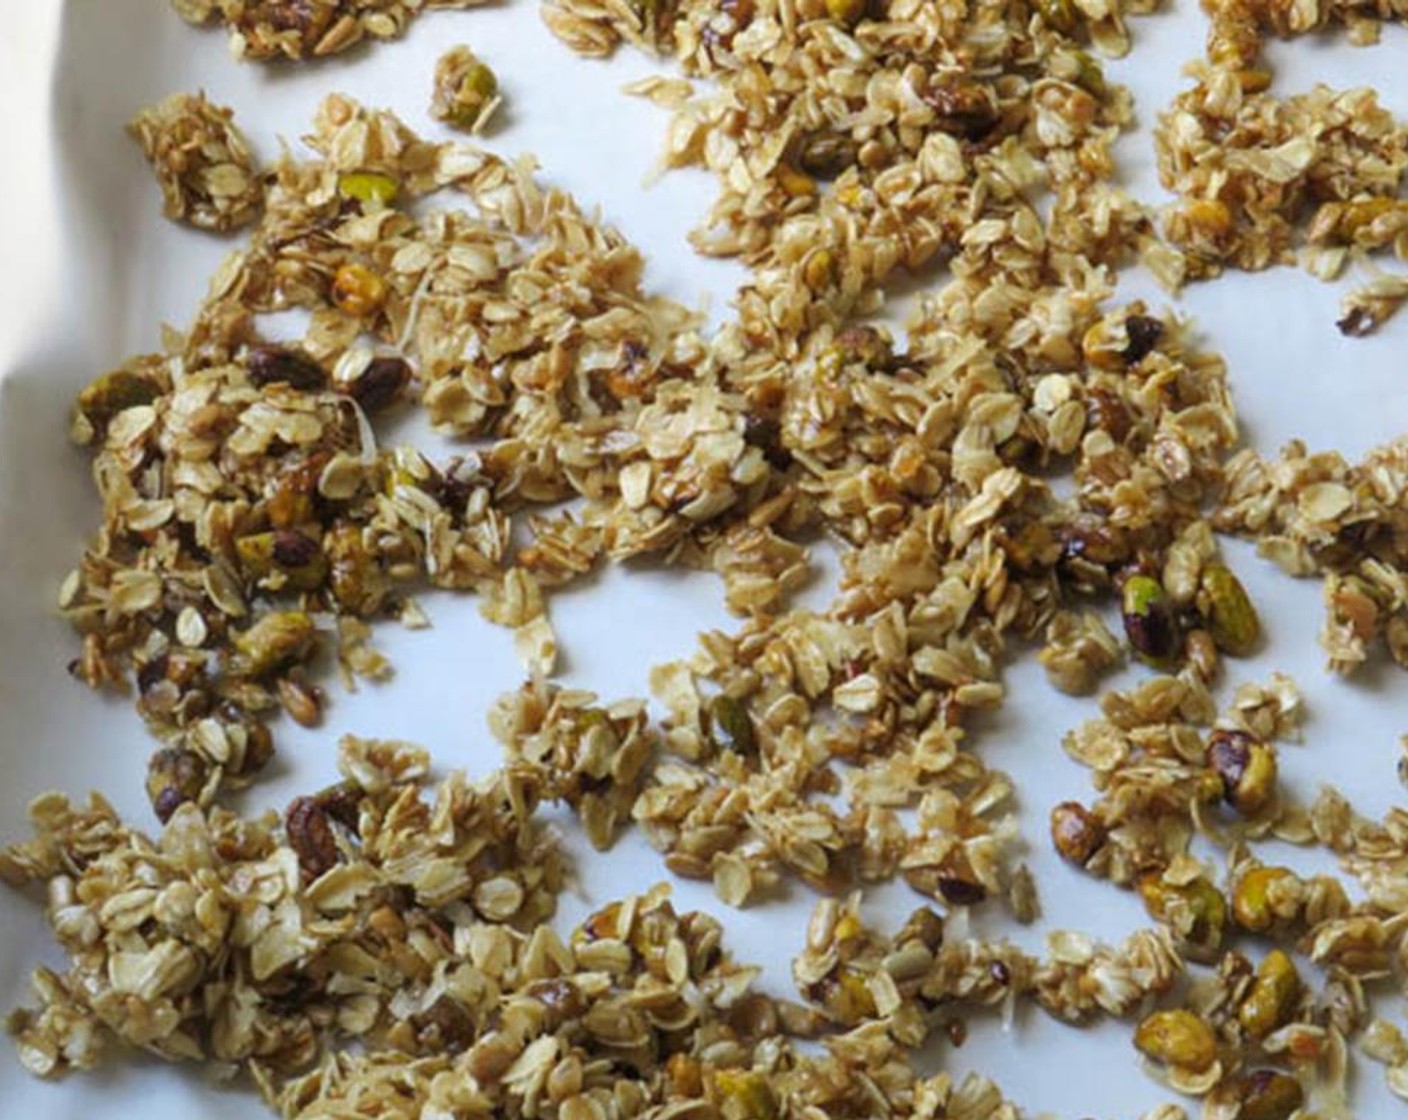 step 6 Divide the granola between the two sheet pans and spread it out into a single layer. Bake for 10 minutes, stir the granola and arrange in a single layer again.